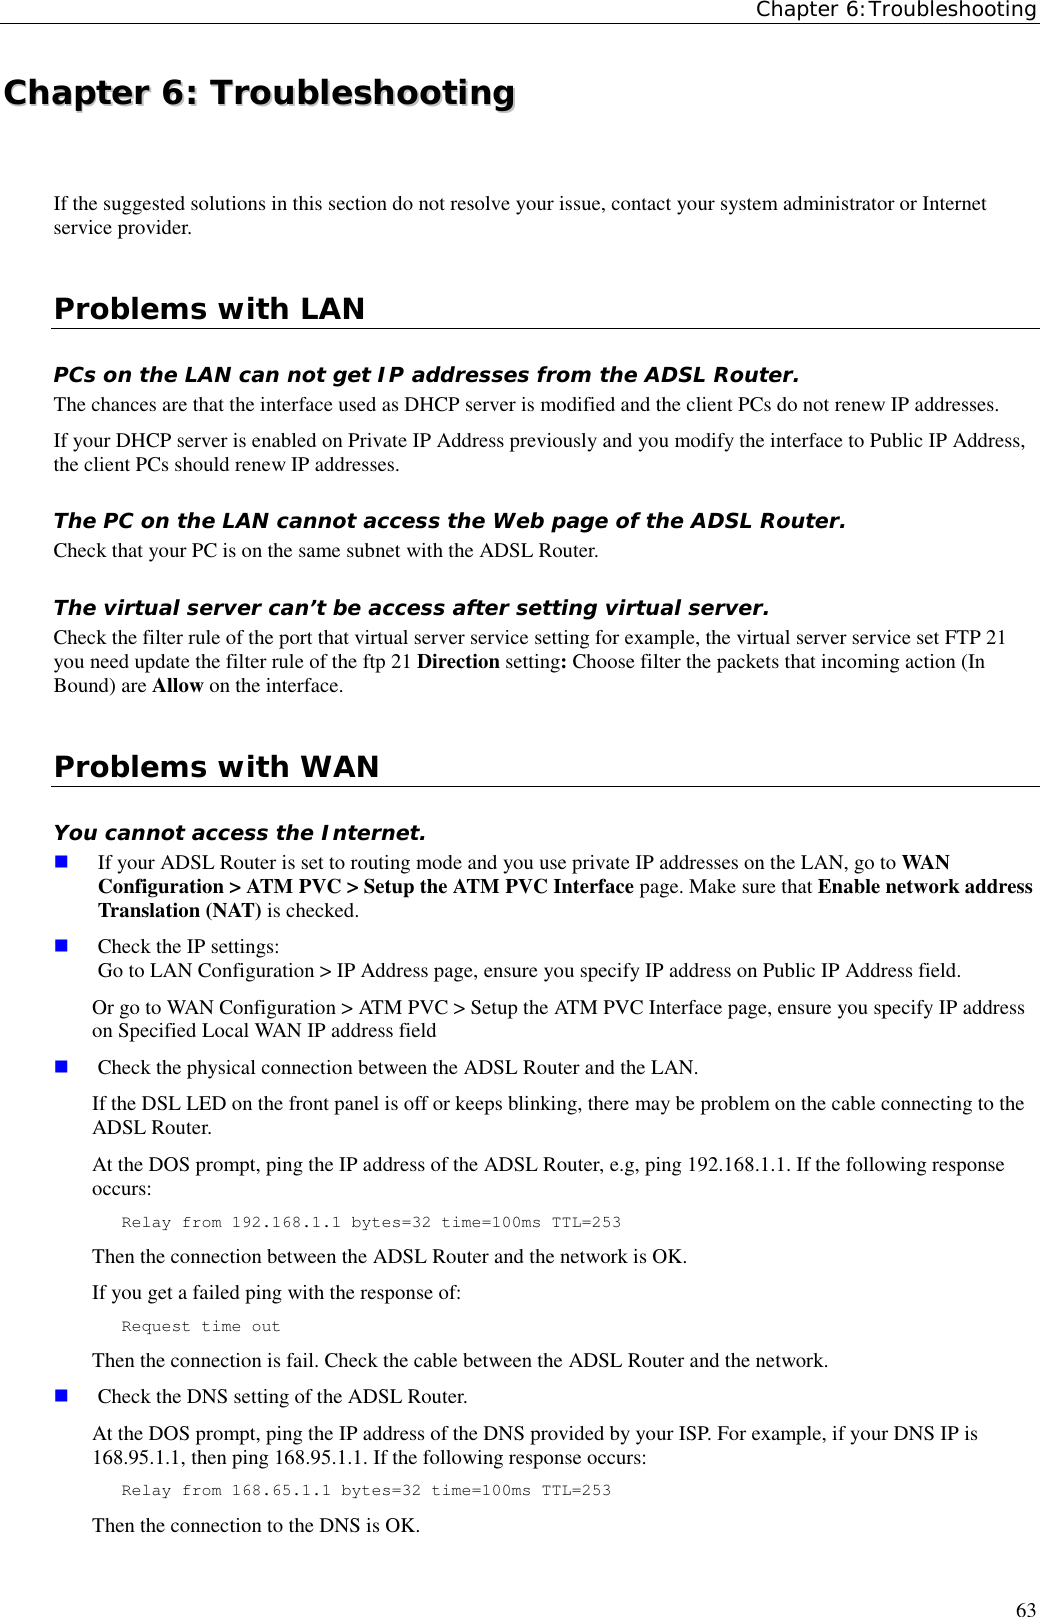 Chapter 6:Troubleshooting63CChhaapptteerr  66::  TTrroouubblleesshhoooottiinnggIf the suggested solutions in this section do not resolve your issue, contact your system administrator or Internetservice provider.Problems with LANPCs on the LAN can not get IP addresses from the ADSL Router.The chances are that the interface used as DHCP server is modified and the client PCs do not renew IP addresses.If your DHCP server is enabled on Private IP Address previously and you modify the interface to Public IP Address,the client PCs should renew IP addresses.The PC on the LAN cannot access the Web page of the ADSL Router.Check that your PC is on the same subnet with the ADSL Router.The virtual server can’t be access after setting virtual server.Check the filter rule of the port that virtual server service setting for example, the virtual server service set FTP 21you need update the filter rule of the ftp 21 Direction setting: Choose filter the packets that incoming action (InBound) are Allow on the interface.Problems with WANYou cannot access the Internet. If your ADSL Router is set to routing mode and you use private IP addresses on the LAN, go to WANConfiguration &gt; ATM PVC &gt; Setup the ATM PVC Interface page. Make sure that Enable network addressTranslation (NAT) is checked. Check the IP settings:Go to LAN Configuration &gt; IP Address page, ensure you specify IP address on Public IP Address field.Or go to WAN Configuration &gt; ATM PVC &gt; Setup the ATM PVC Interface page, ensure you specify IP addresson Specified Local WAN IP address field Check the physical connection between the ADSL Router and the LAN.If the DSL LED on the front panel is off or keeps blinking, there may be problem on the cable connecting to theADSL Router.At the DOS prompt, ping the IP address of the ADSL Router, e.g, ping 192.168.1.1. If the following responseoccurs:Relay from 192.168.1.1 bytes=32 time=100ms TTL=253Then the connection between the ADSL Router and the network is OK.If you get a failed ping with the response of:Request time outThen the connection is fail. Check the cable between the ADSL Router and the network. Check the DNS setting of the ADSL Router.At the DOS prompt, ping the IP address of the DNS provided by your ISP. For example, if your DNS IP is168.95.1.1, then ping 168.95.1.1. If the following response occurs:Relay from 168.65.1.1 bytes=32 time=100ms TTL=253Then the connection to the DNS is OK.